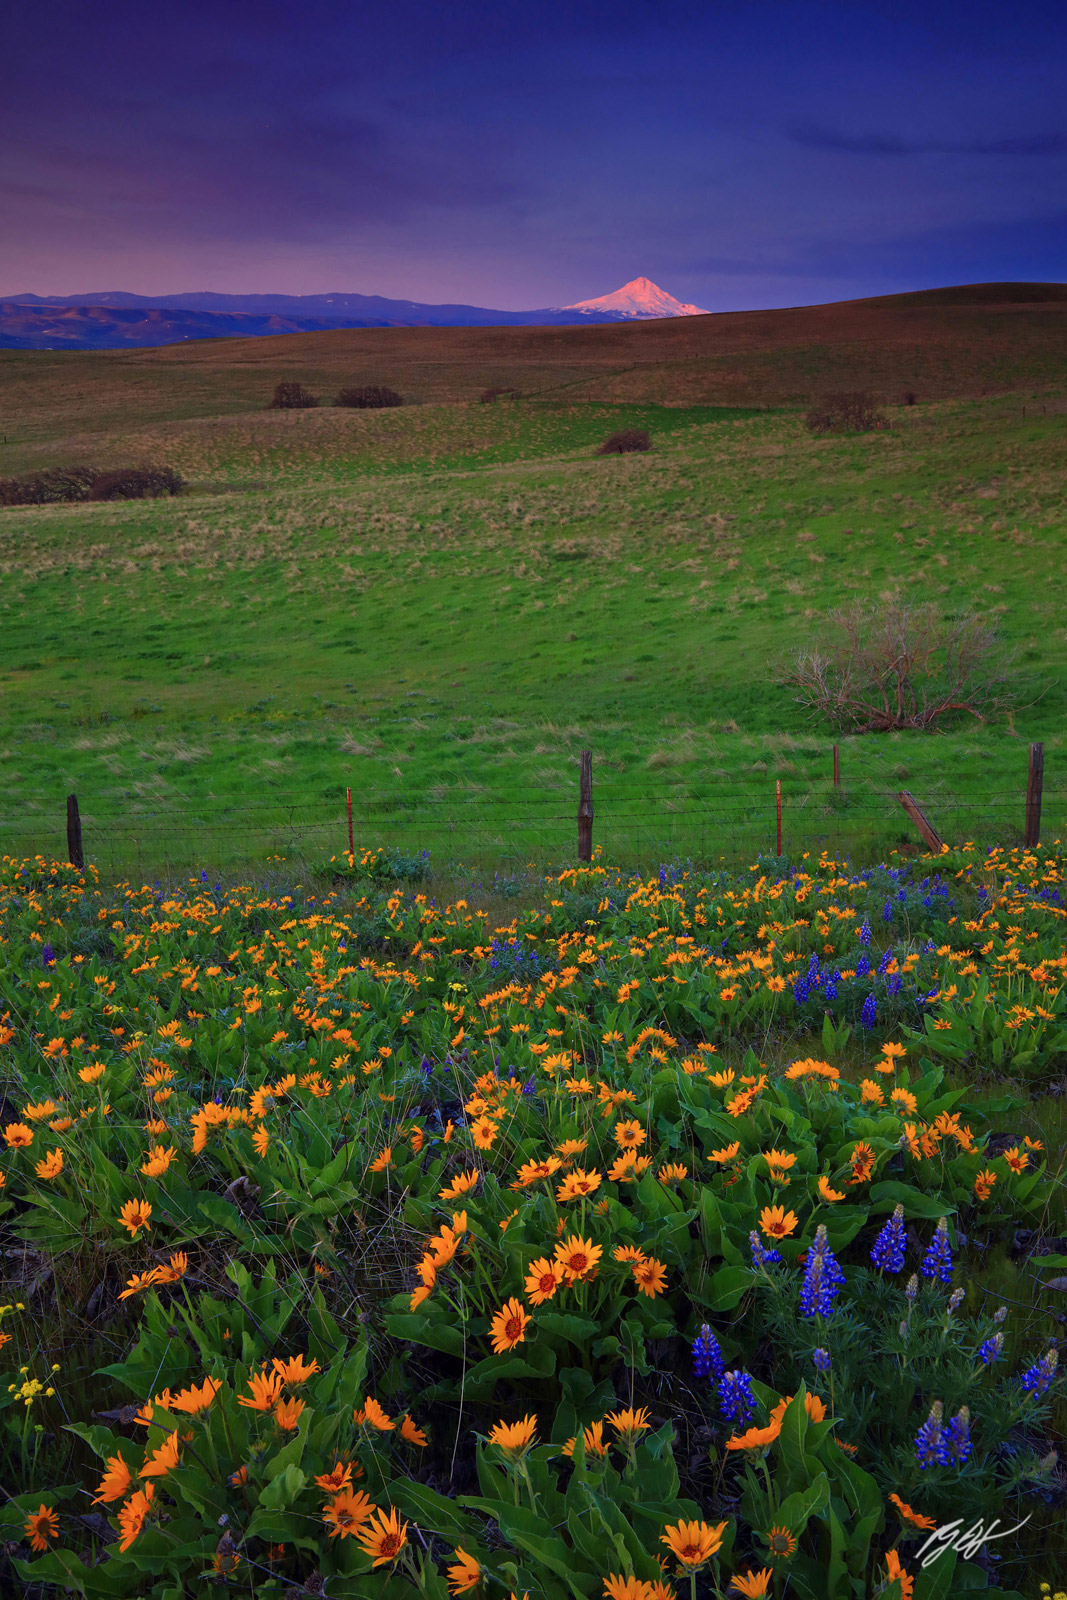 Sunrise Wildflowers and Mt Hood from the Columbia Hills Historical State Park in the Columbia River Gorge in Washington